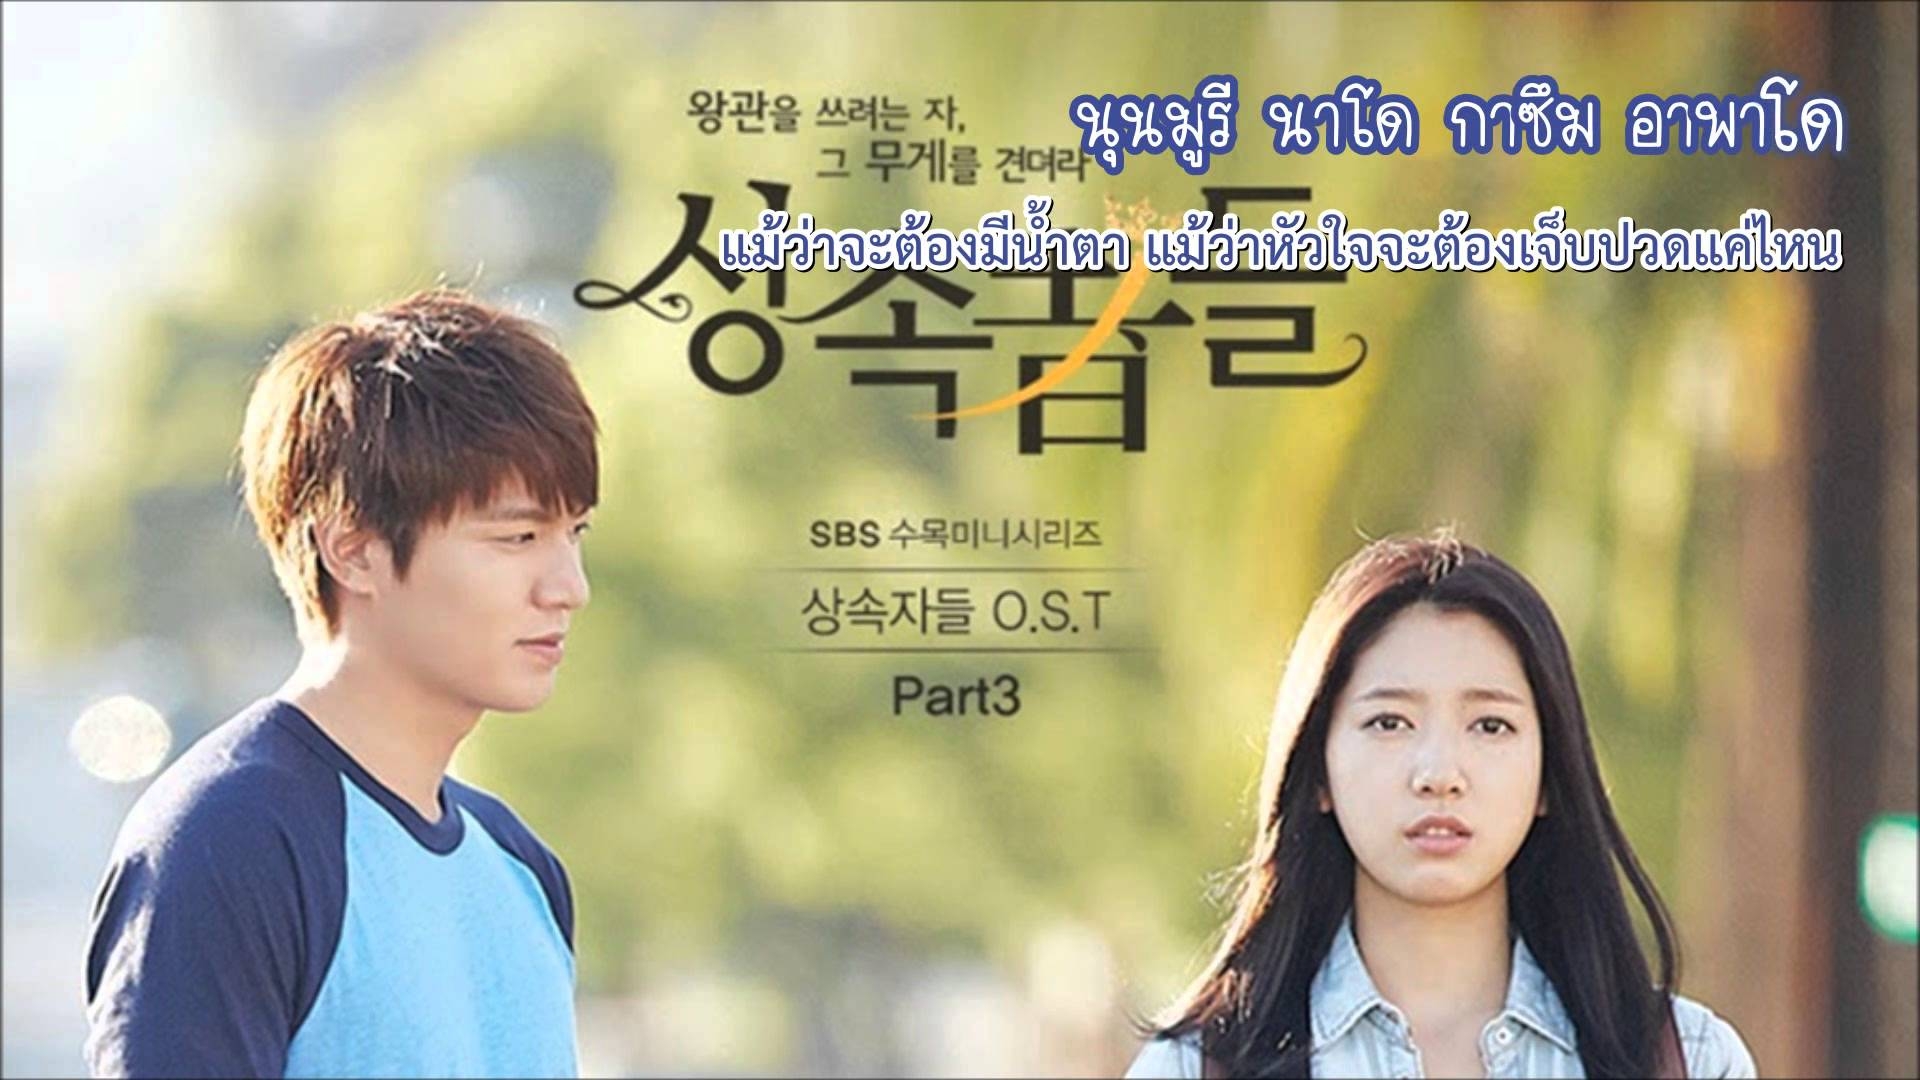 The Heirs, Wallpaper, Wallpapers, Korean Drama - Heirs Ost Part 3 , HD Wallpaper & Backgrounds